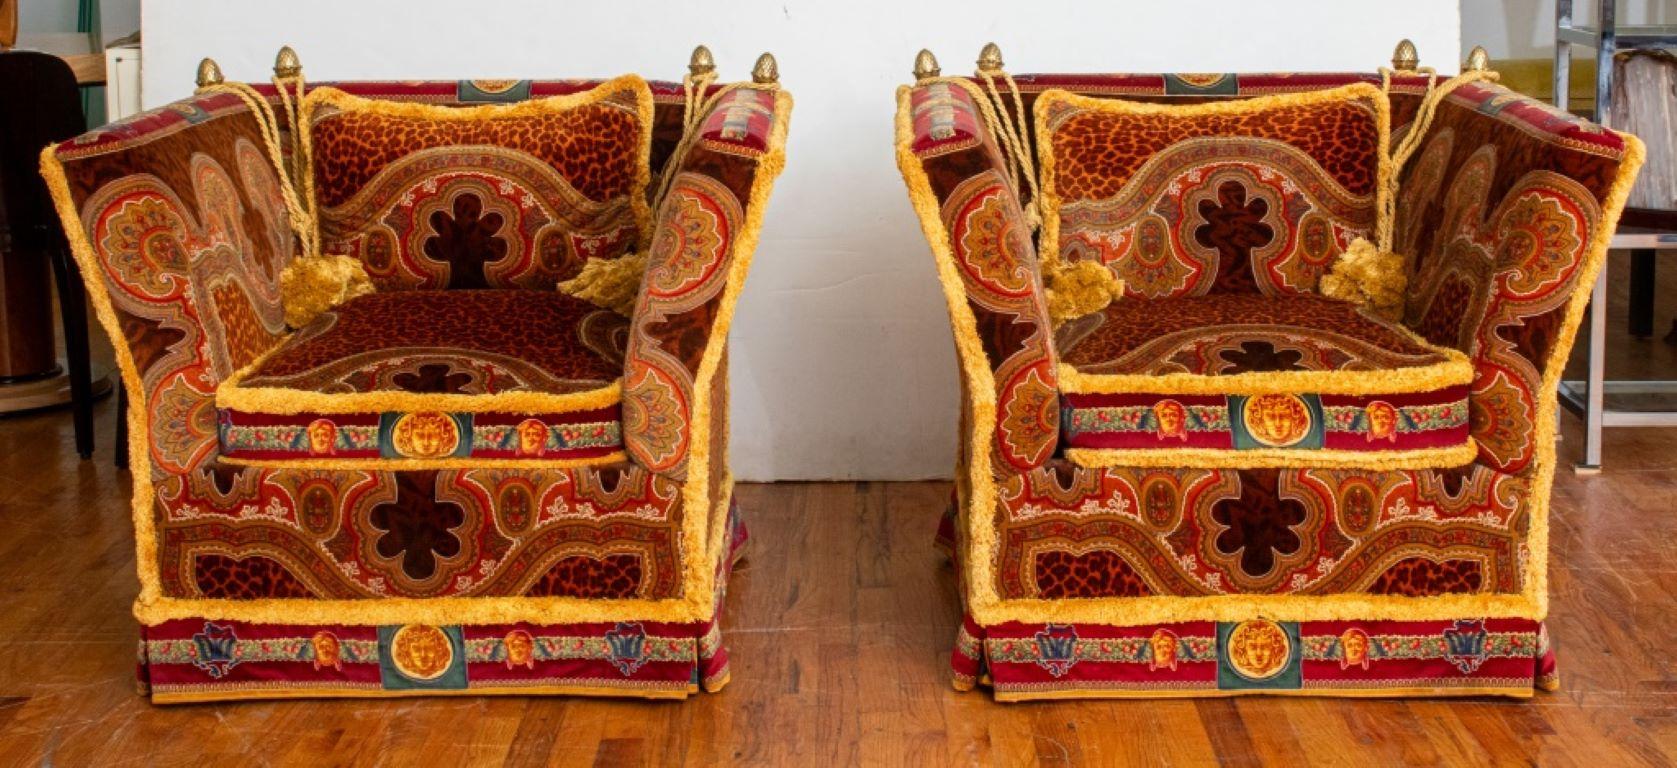 20th Century Gianni Versace Upholstered Knole Suite, 7 Pc For Sale